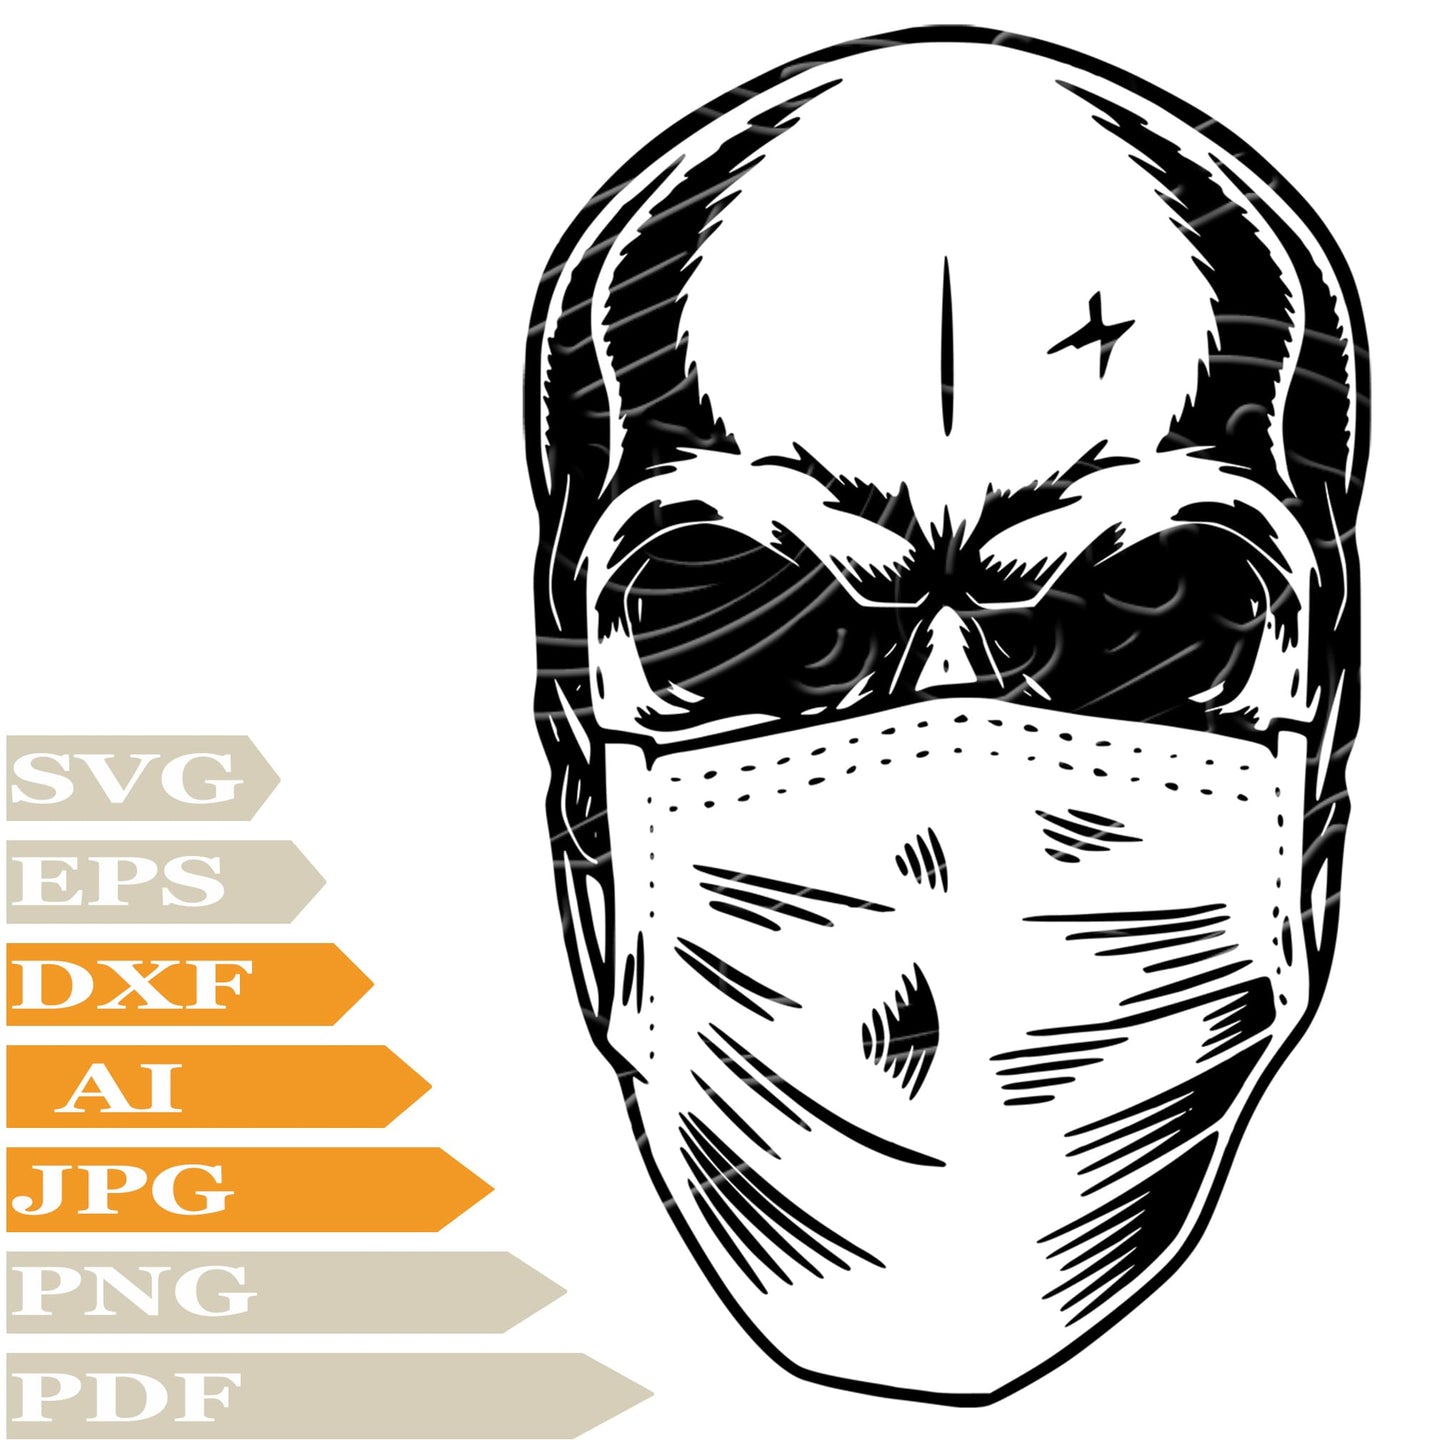 Skull, Skull With Mask Svg File, Image Cut, Png, For Tattoo, Silhouette, Digital Vector Download, Cut File, Clipart, For Cricut